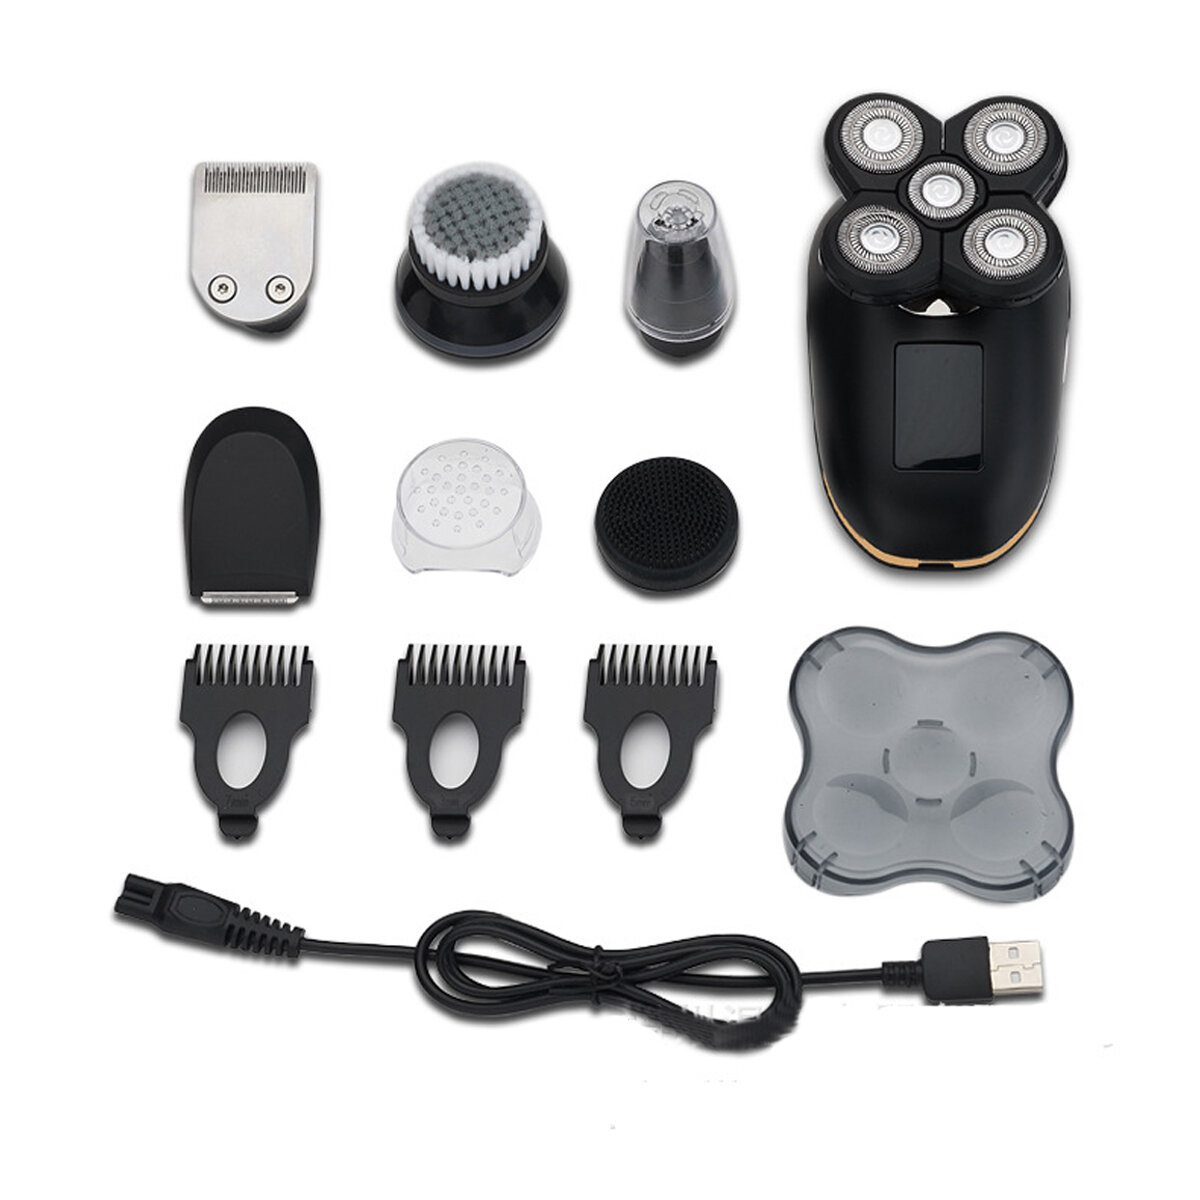 

6 in 1 USB Digital Display Electric Shaver Rechargeable 5 Heads Bald Head Shaver Hair Trimmer Clipper